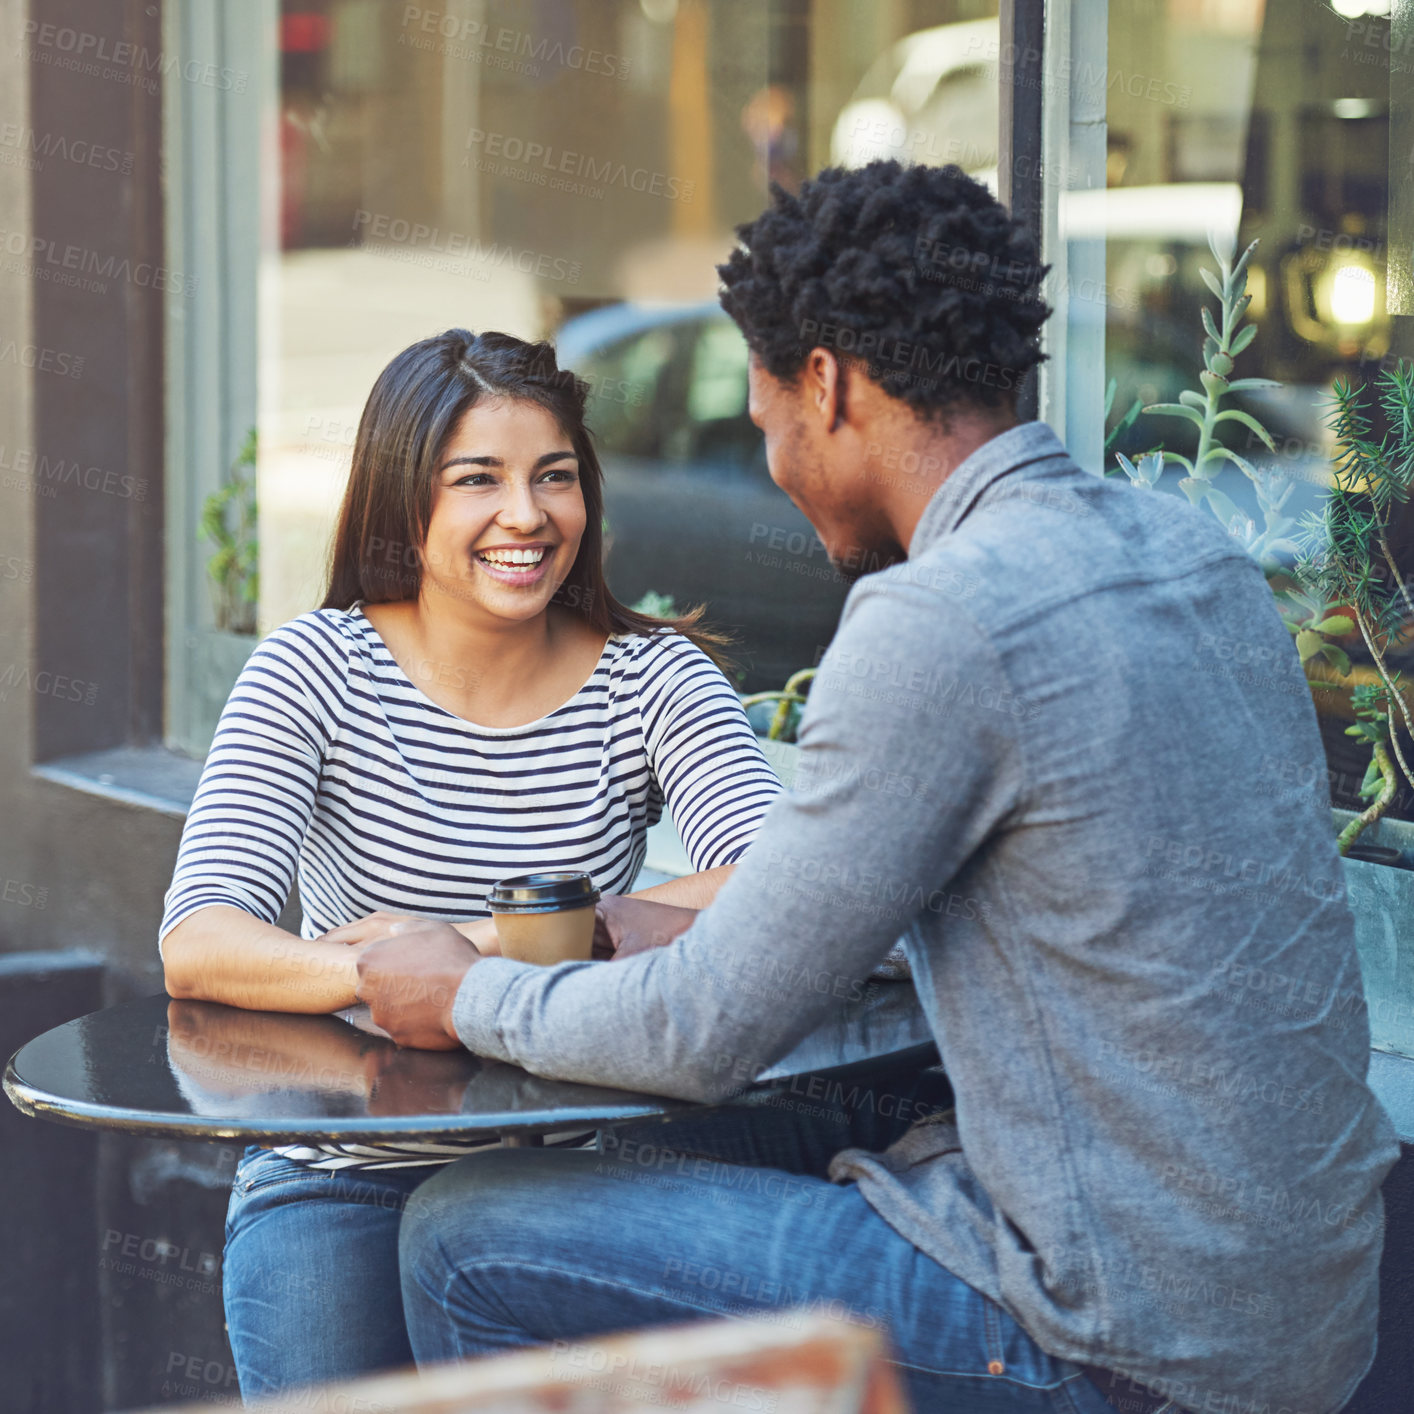 Buy stock photo Shot of a young couple on a coffee date at a sidewalk cafe